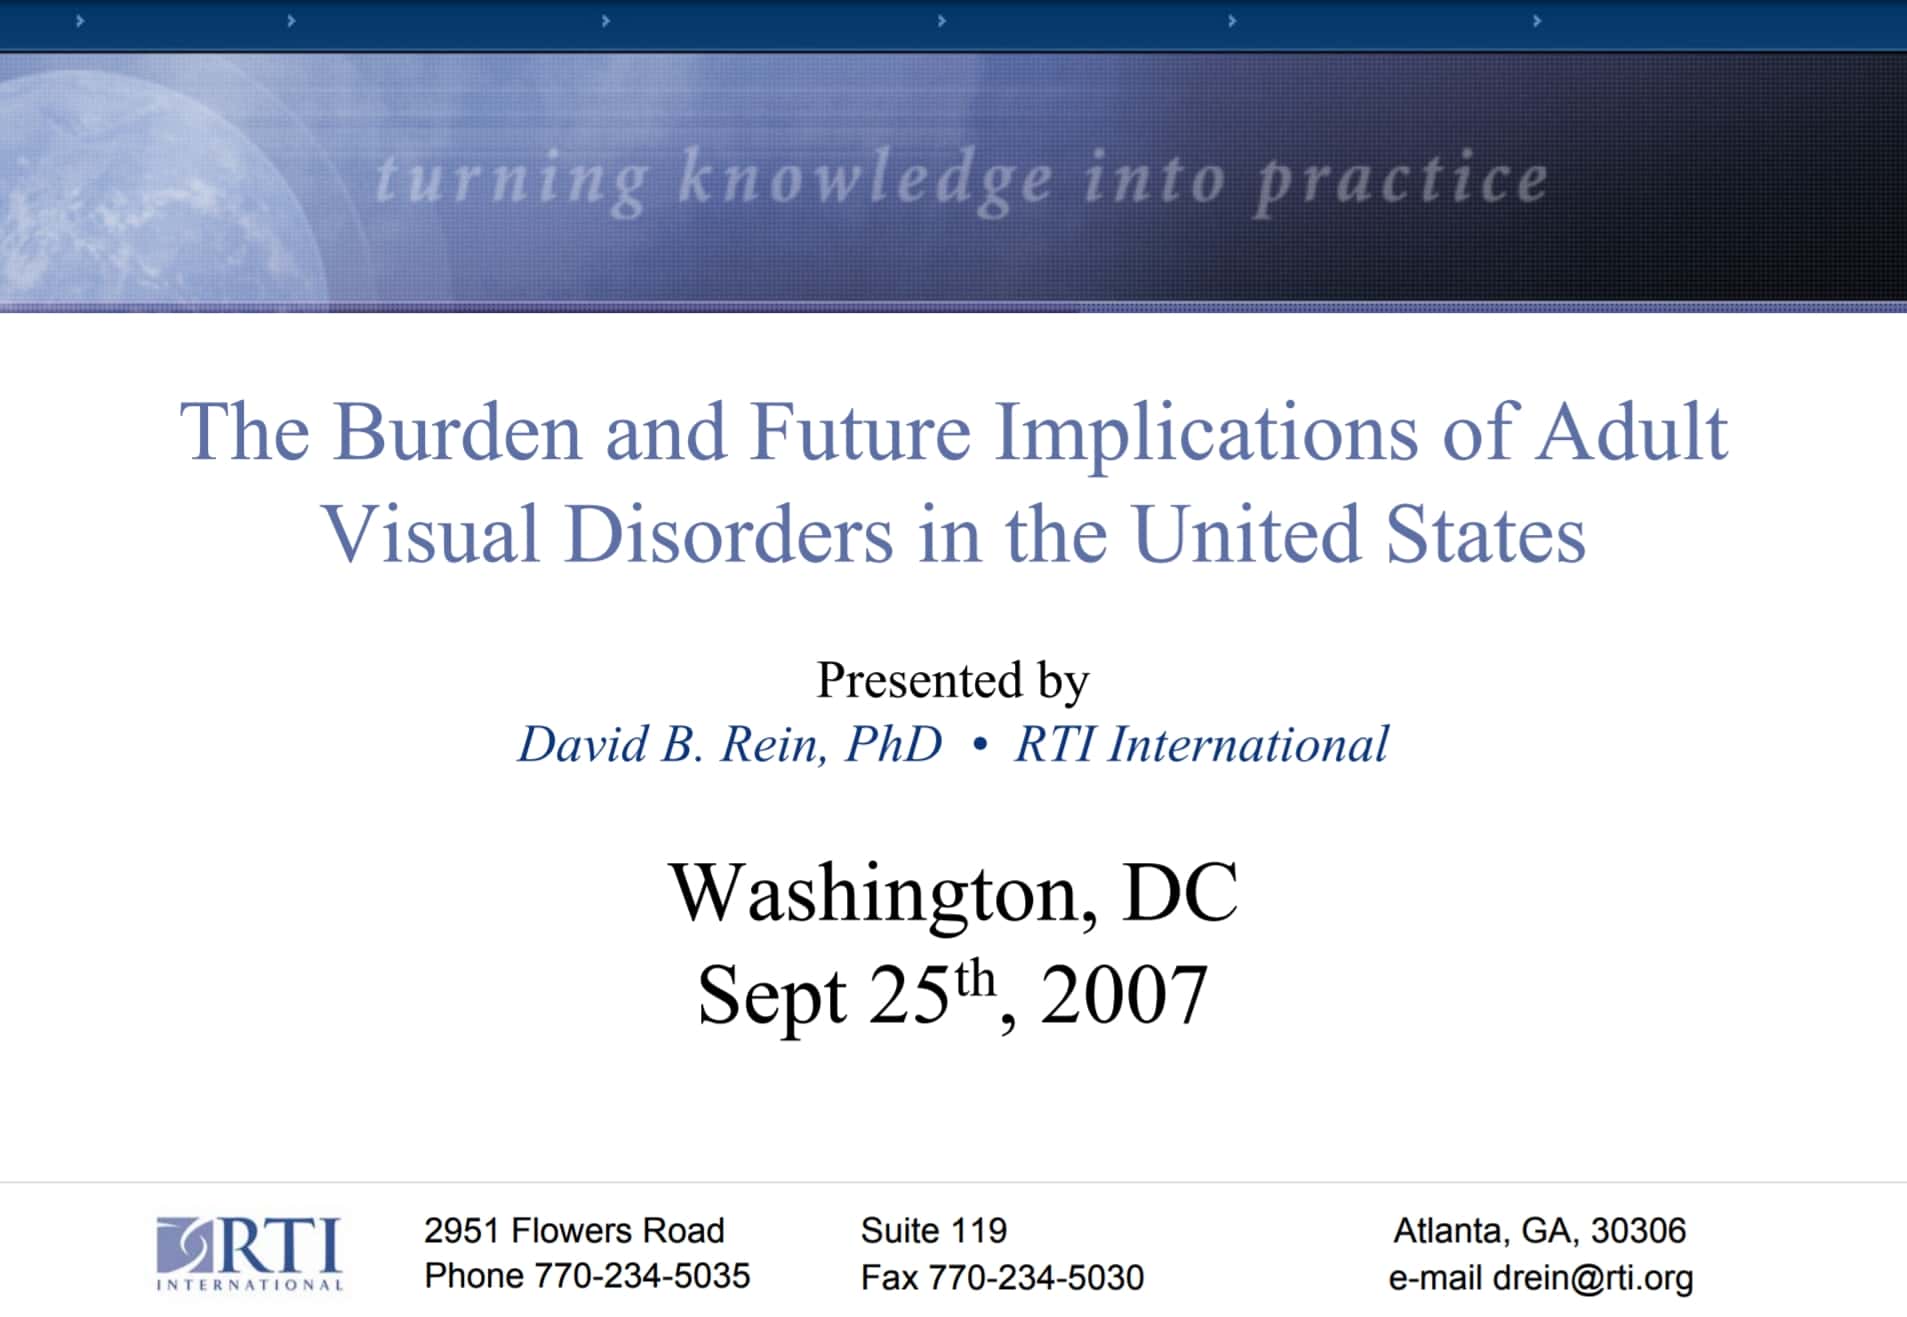 "Burden and Future Implications of Adult Visual Disorders" presentation cover.